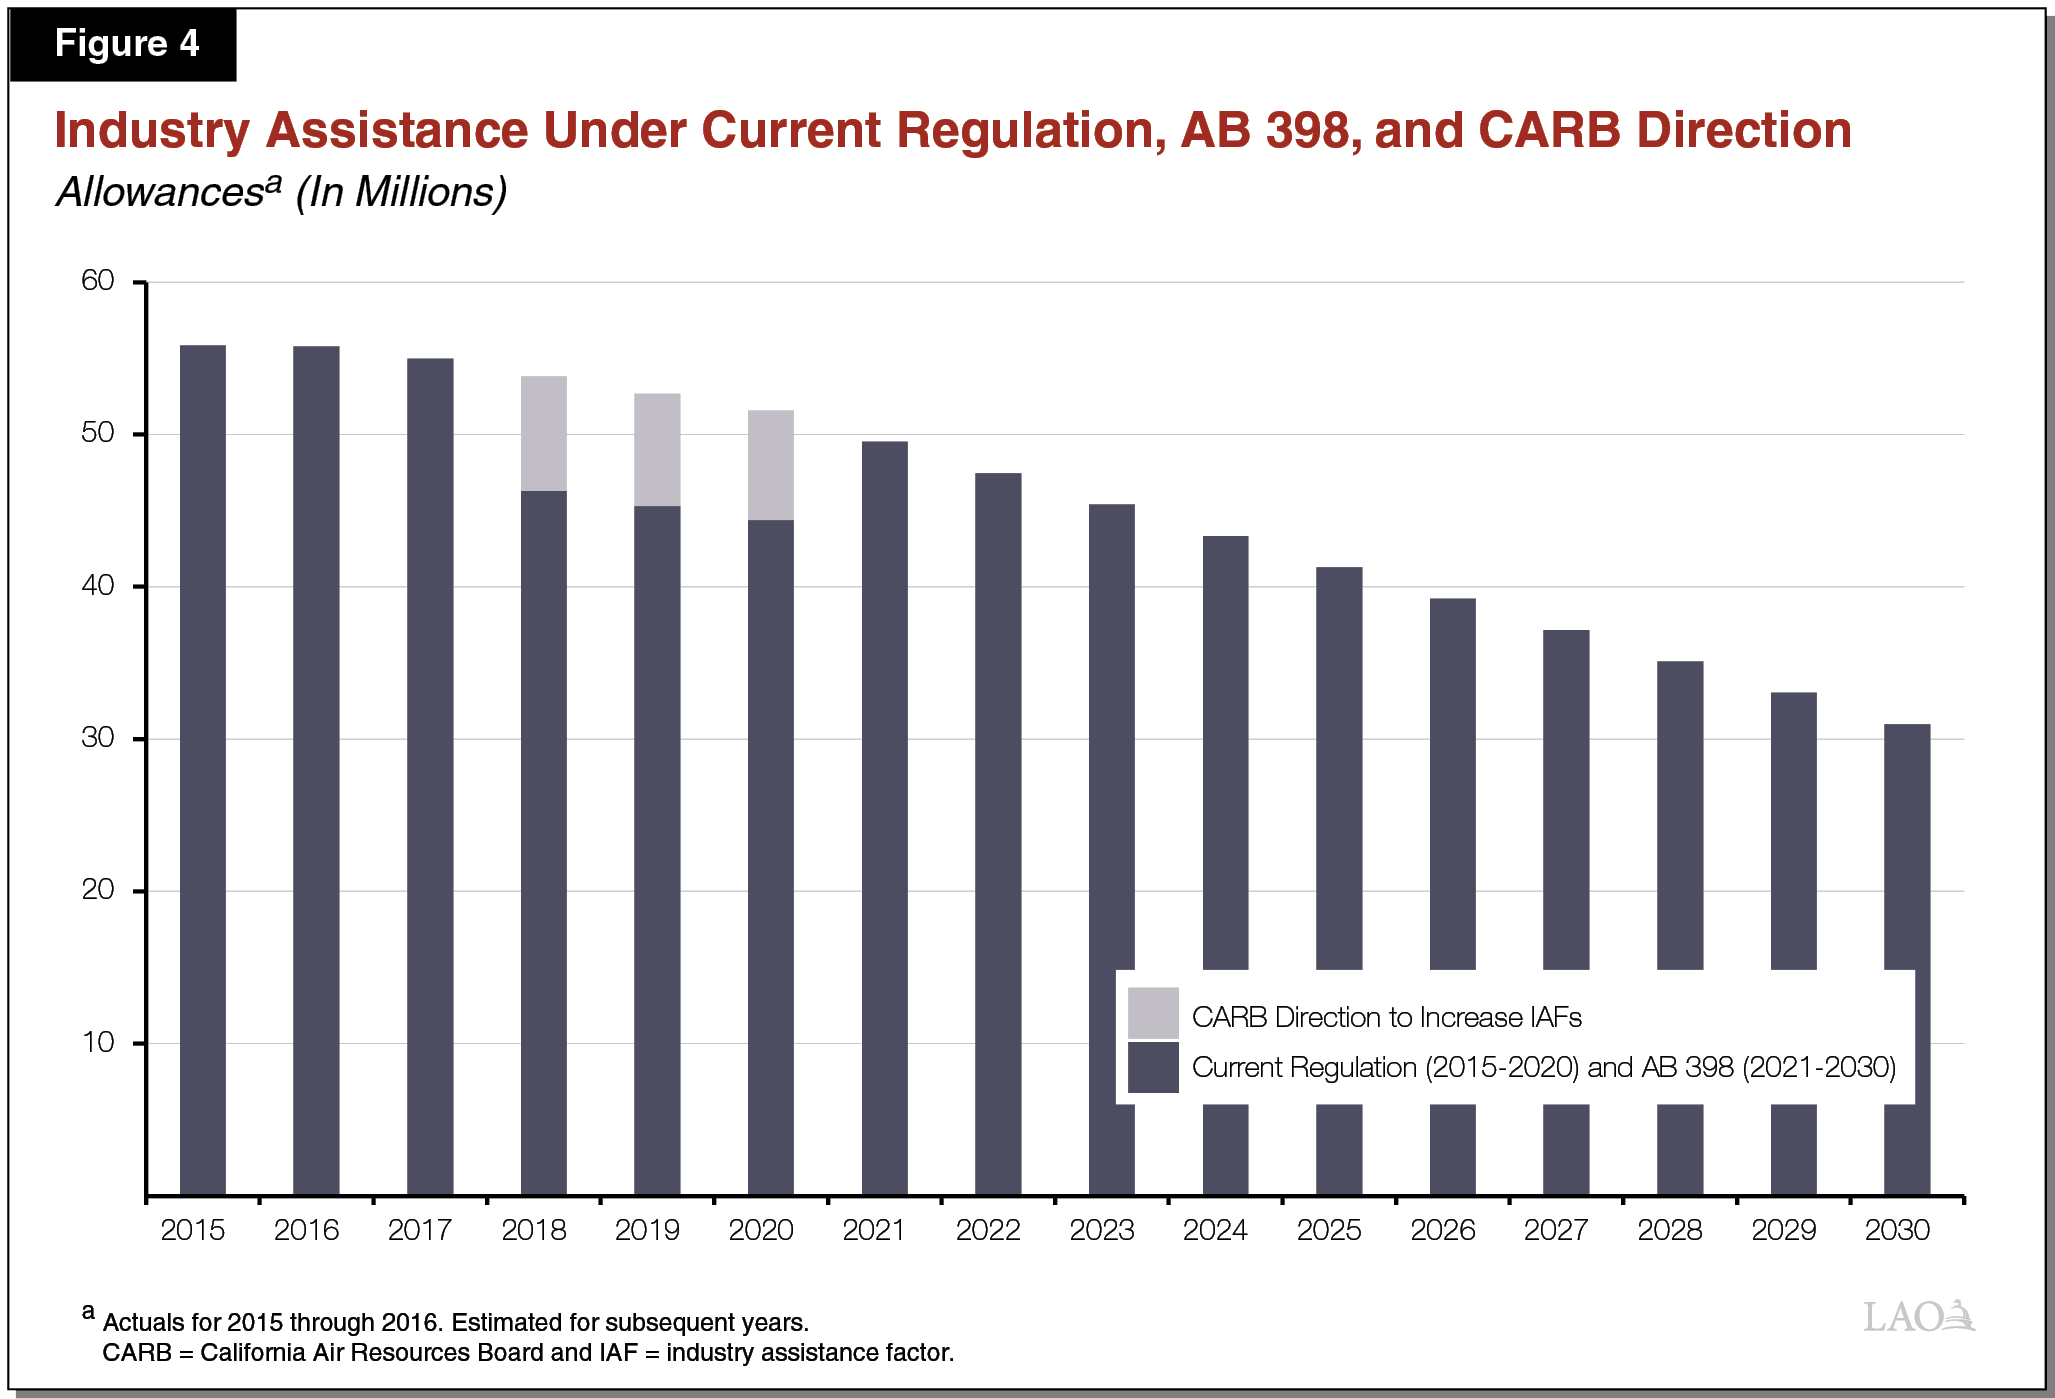 Figure 4 - Industry Assistance Under Current Regulation, AB 398, and CARB Direction